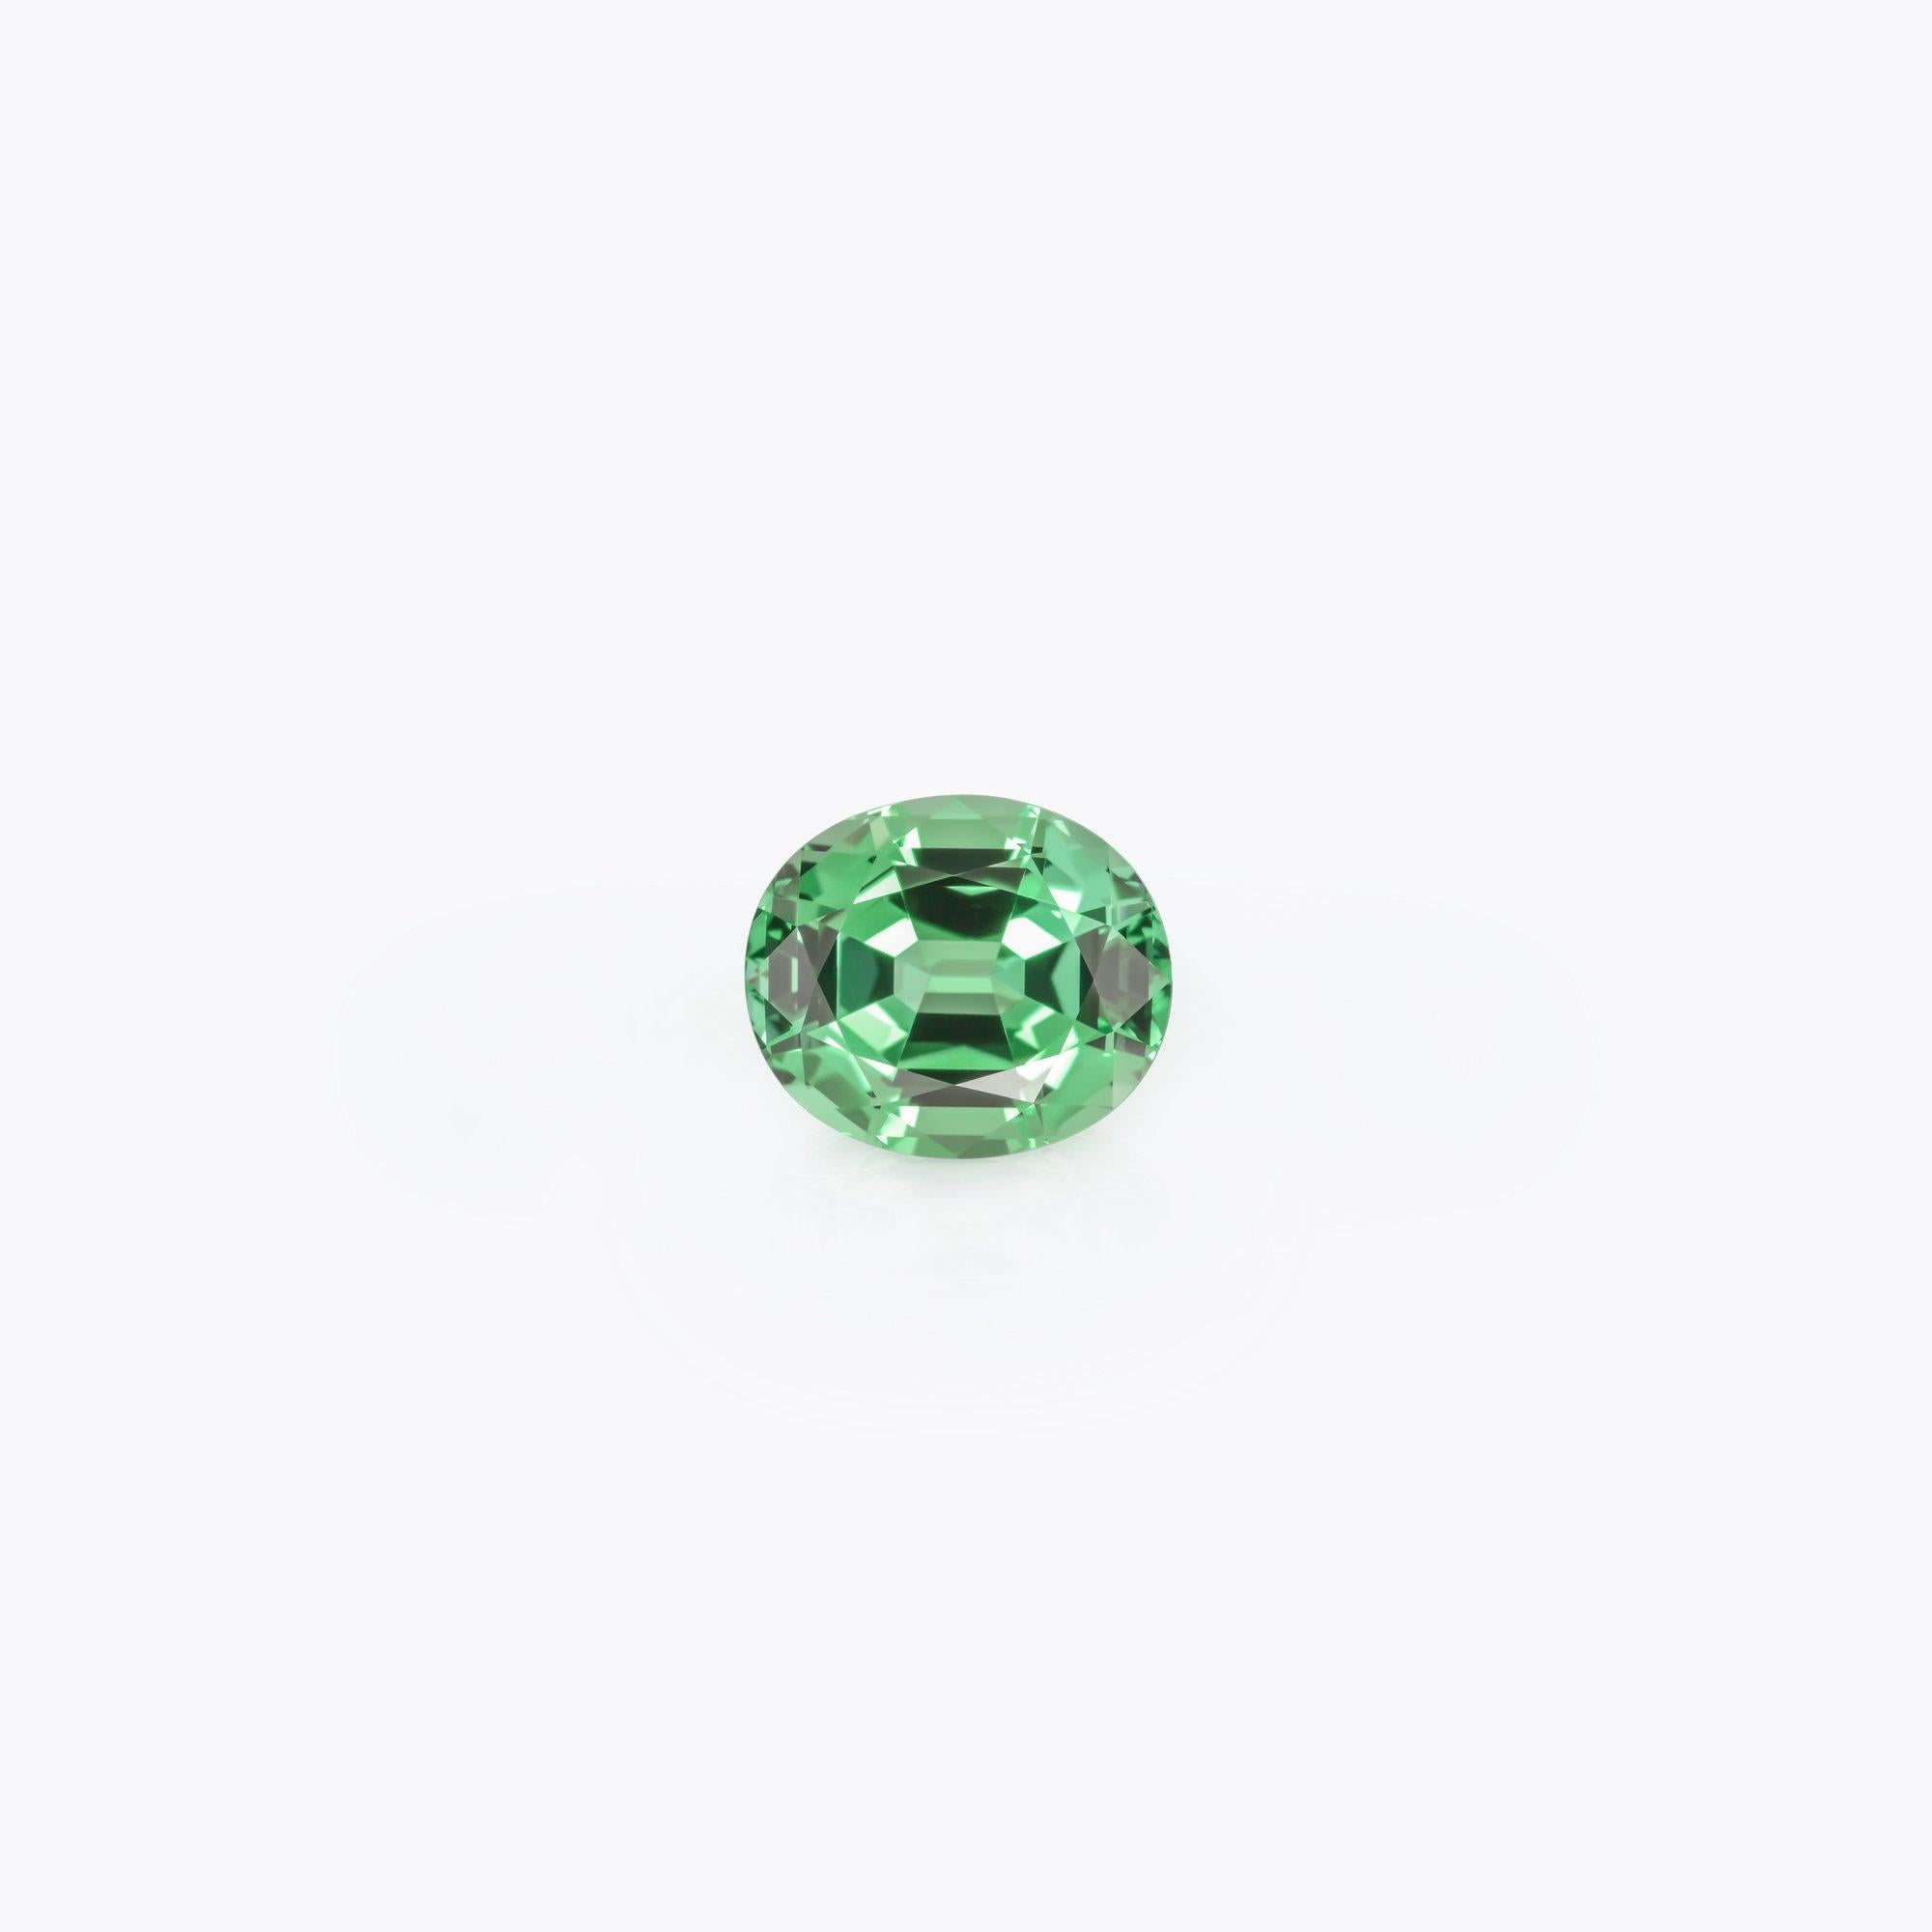 Exceptional 13.67 carat vibrant Green Tourmaline oval gem, offered loose to a fine gem connoisseur.
Returns are accepted and paid by us within 7 days of delivery.
We offer supreme custom jewelry work upon request. Please contact us for more